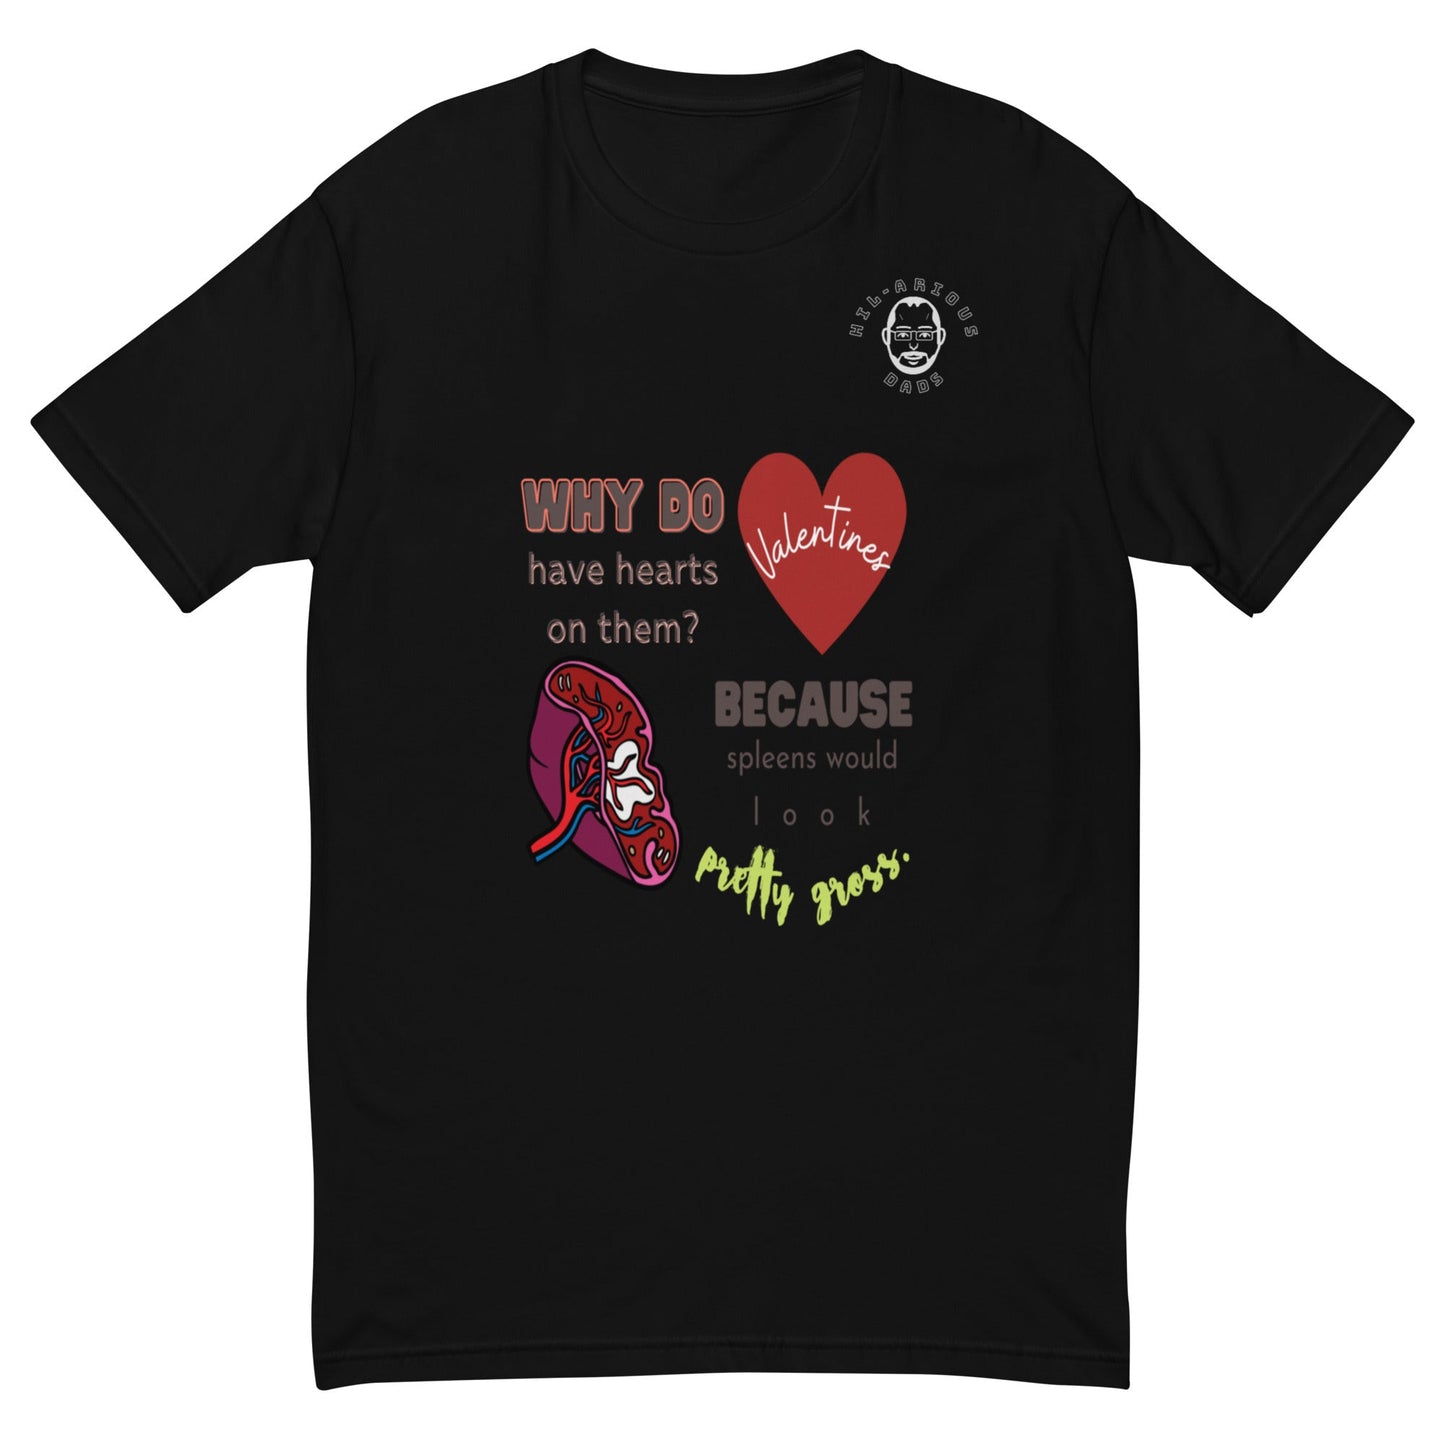 Why do Valentine's have hearts on them?-T-shirt - Hil-arious Dads